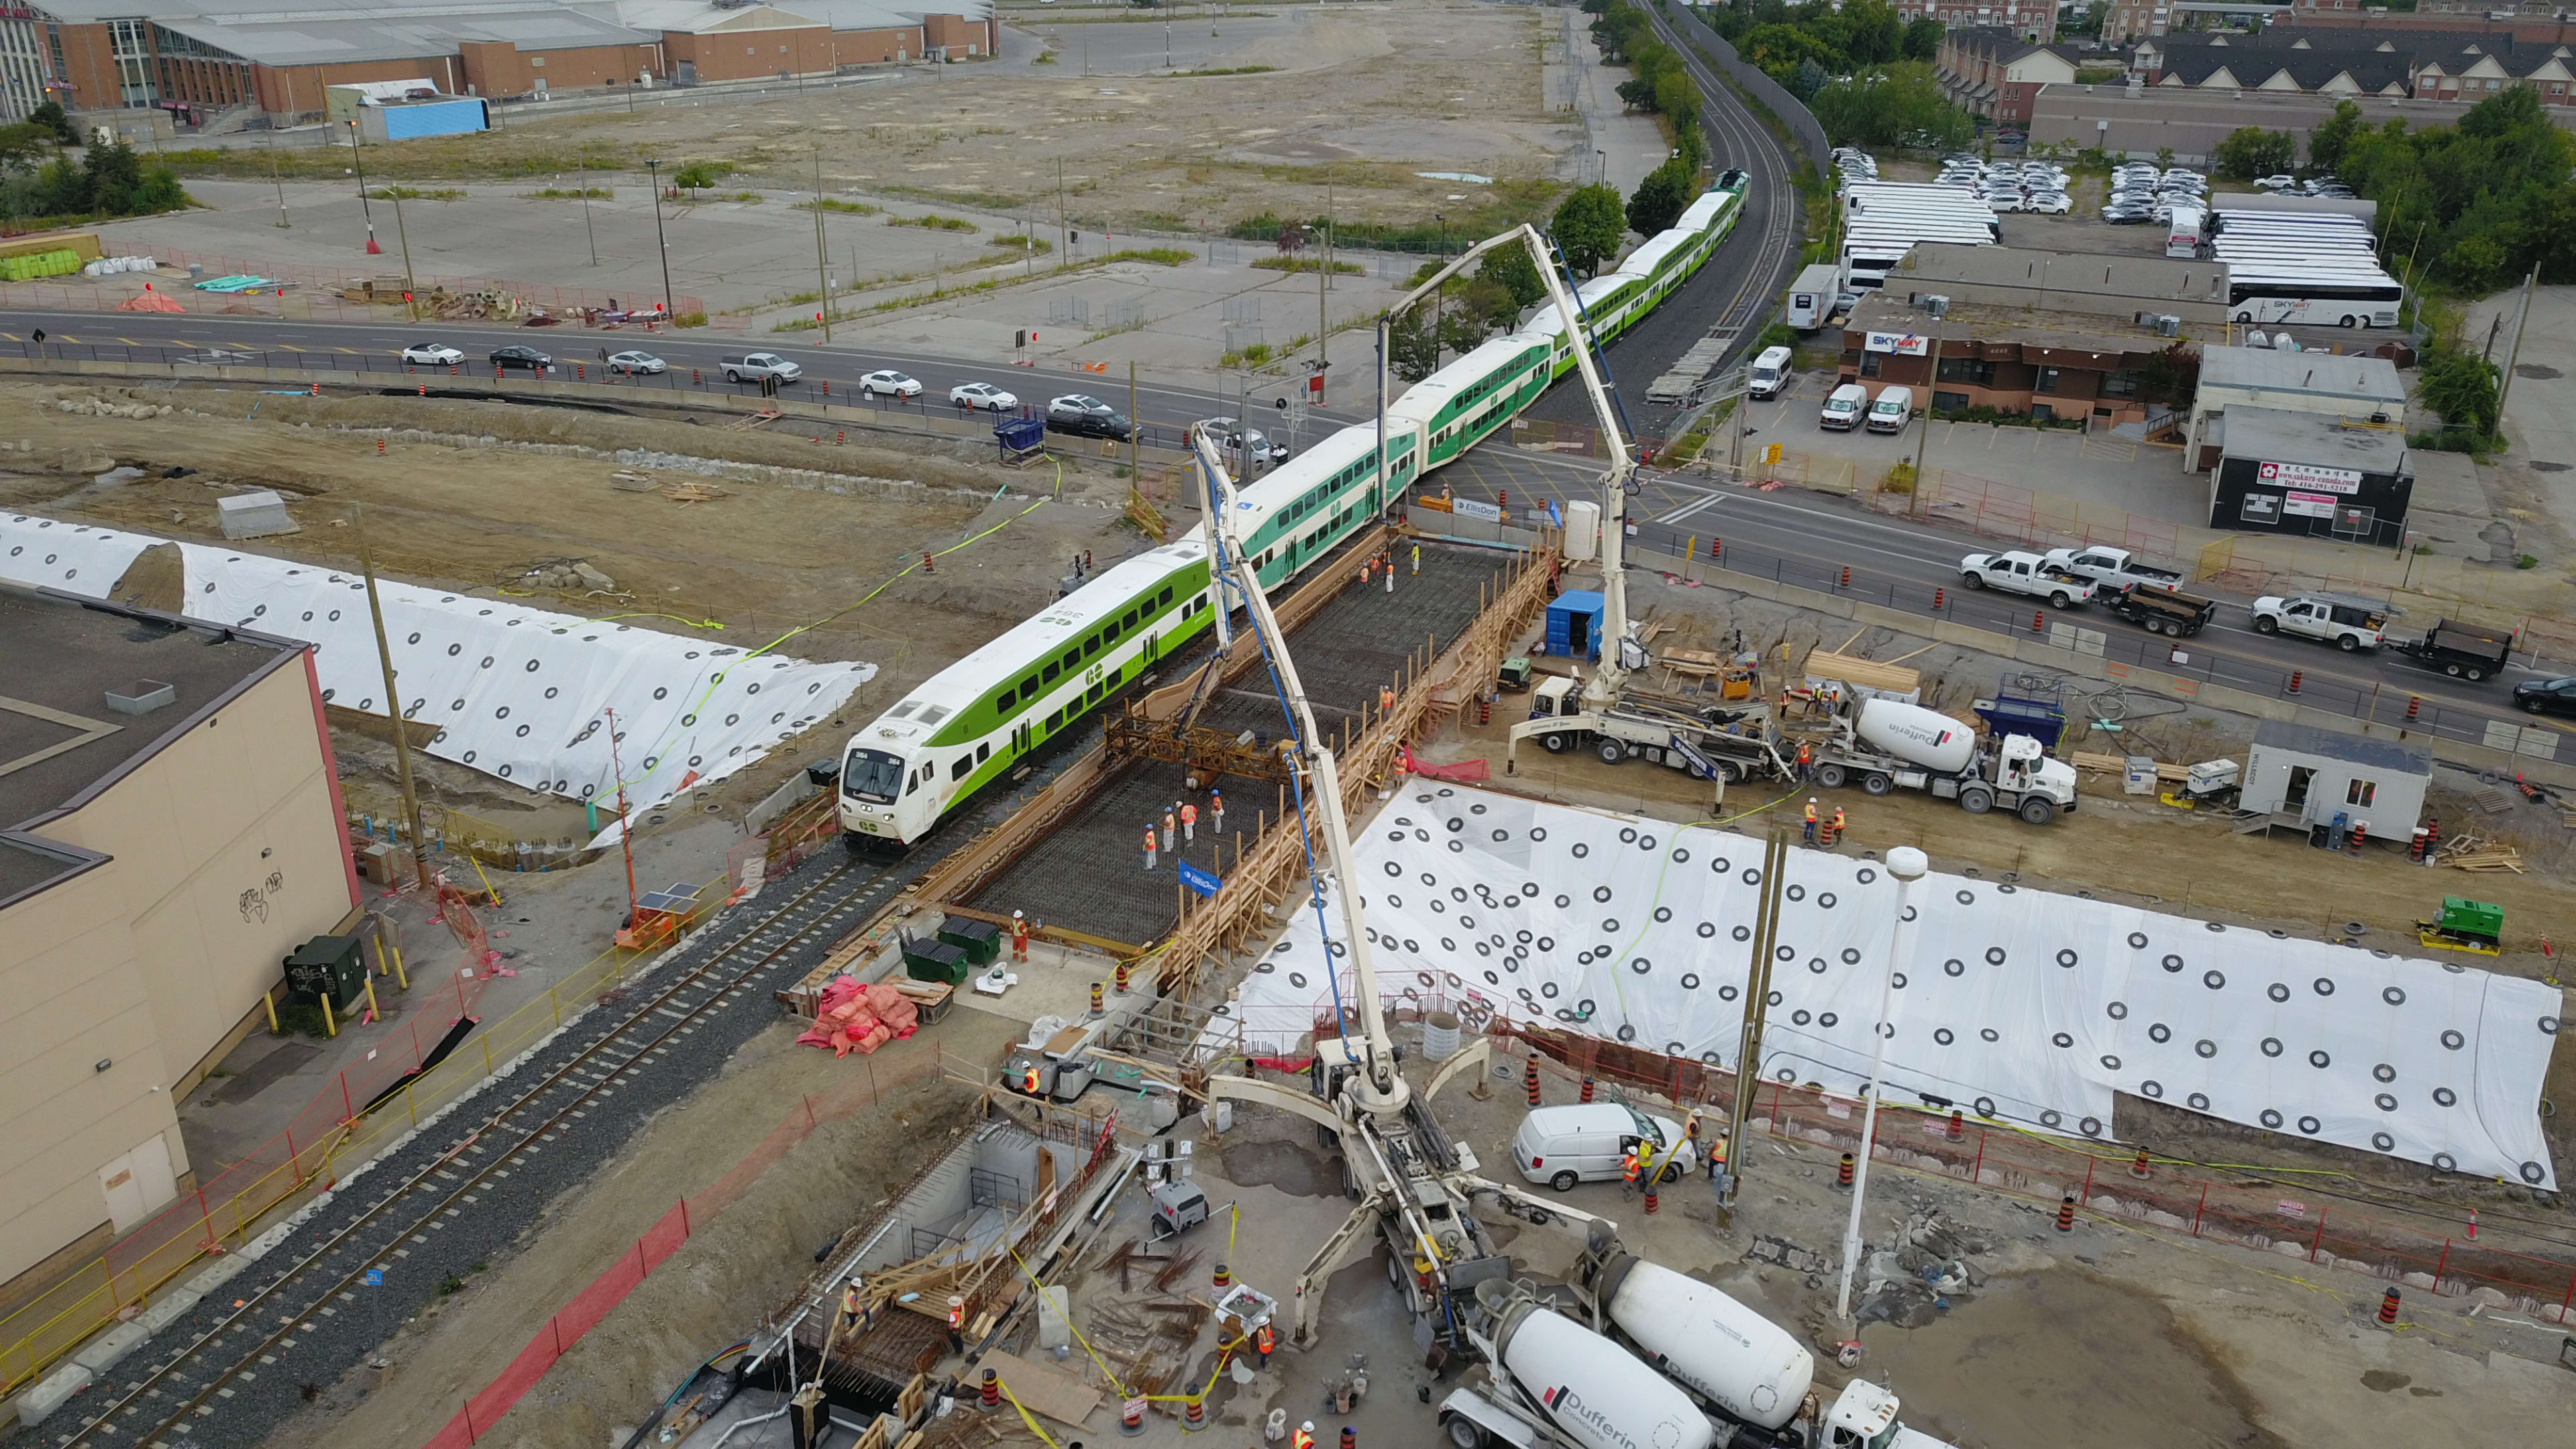 A GO train pass through the Steeles Avenue level crossing while construction goes on